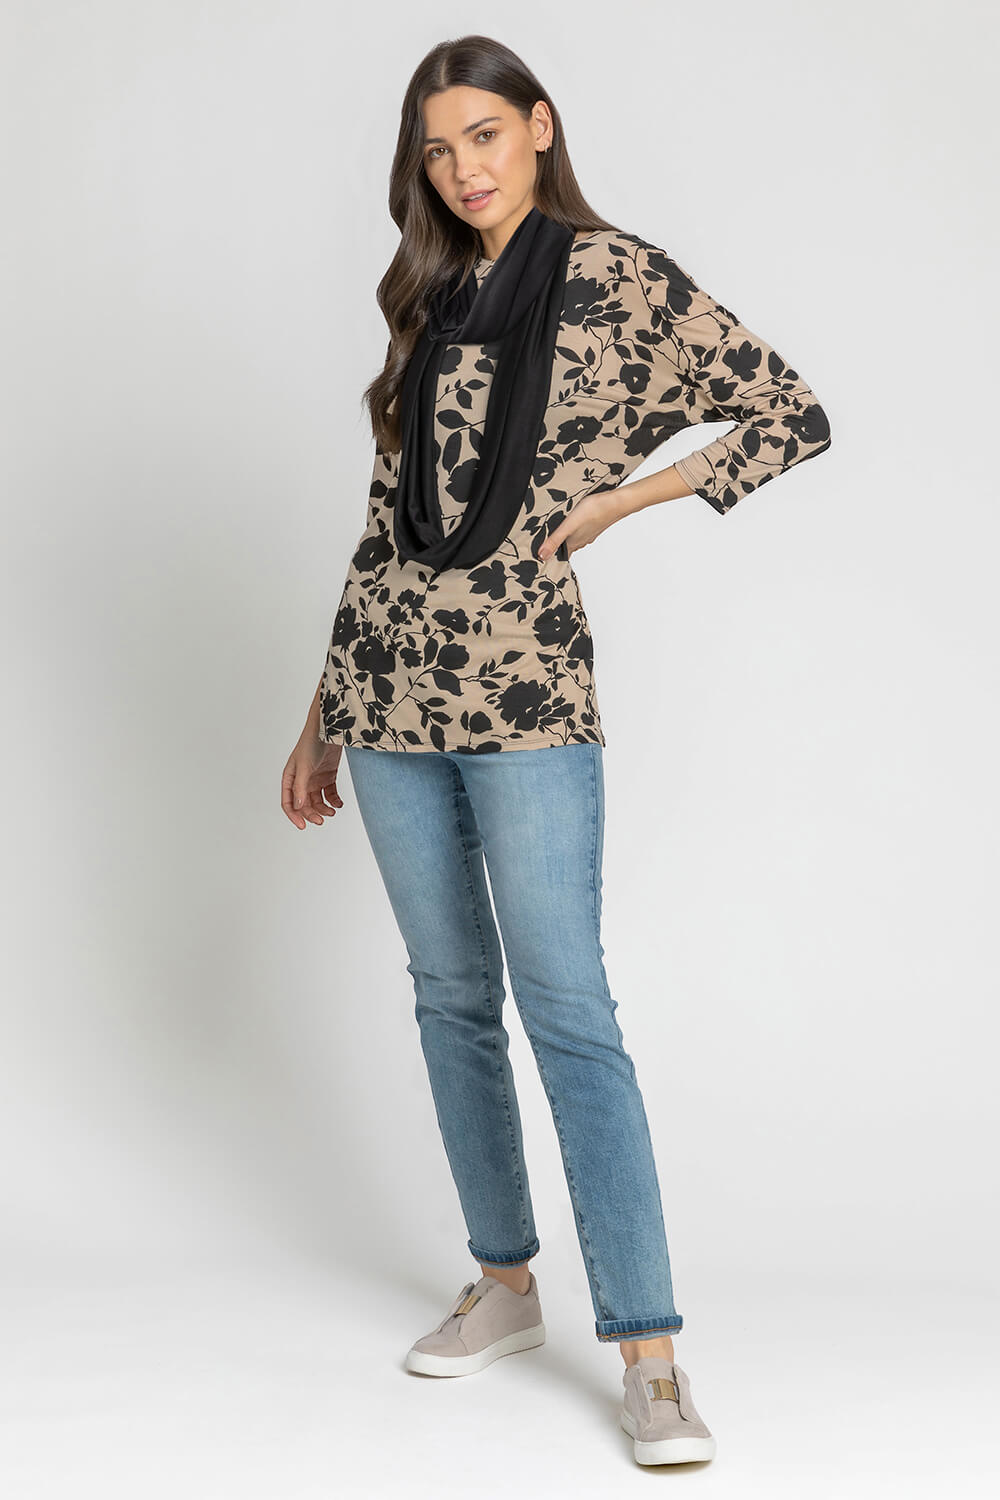 Beige Floral Print Top and Snood, Image 3 of 4